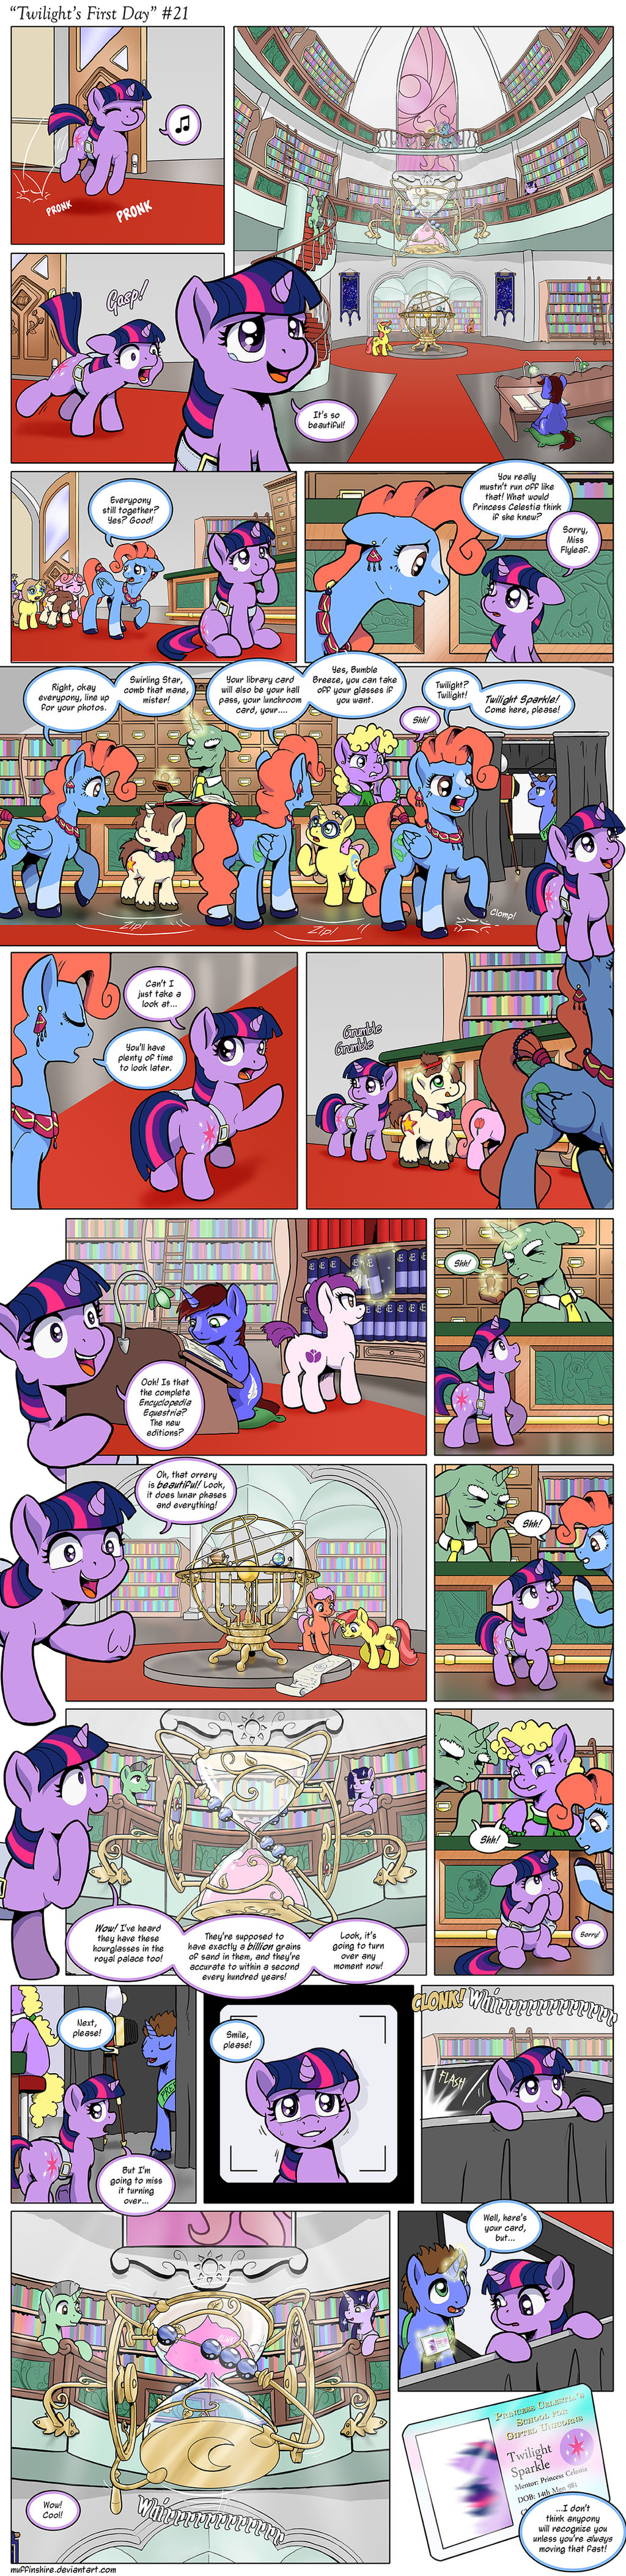 Comic - Twilight's First Day #21